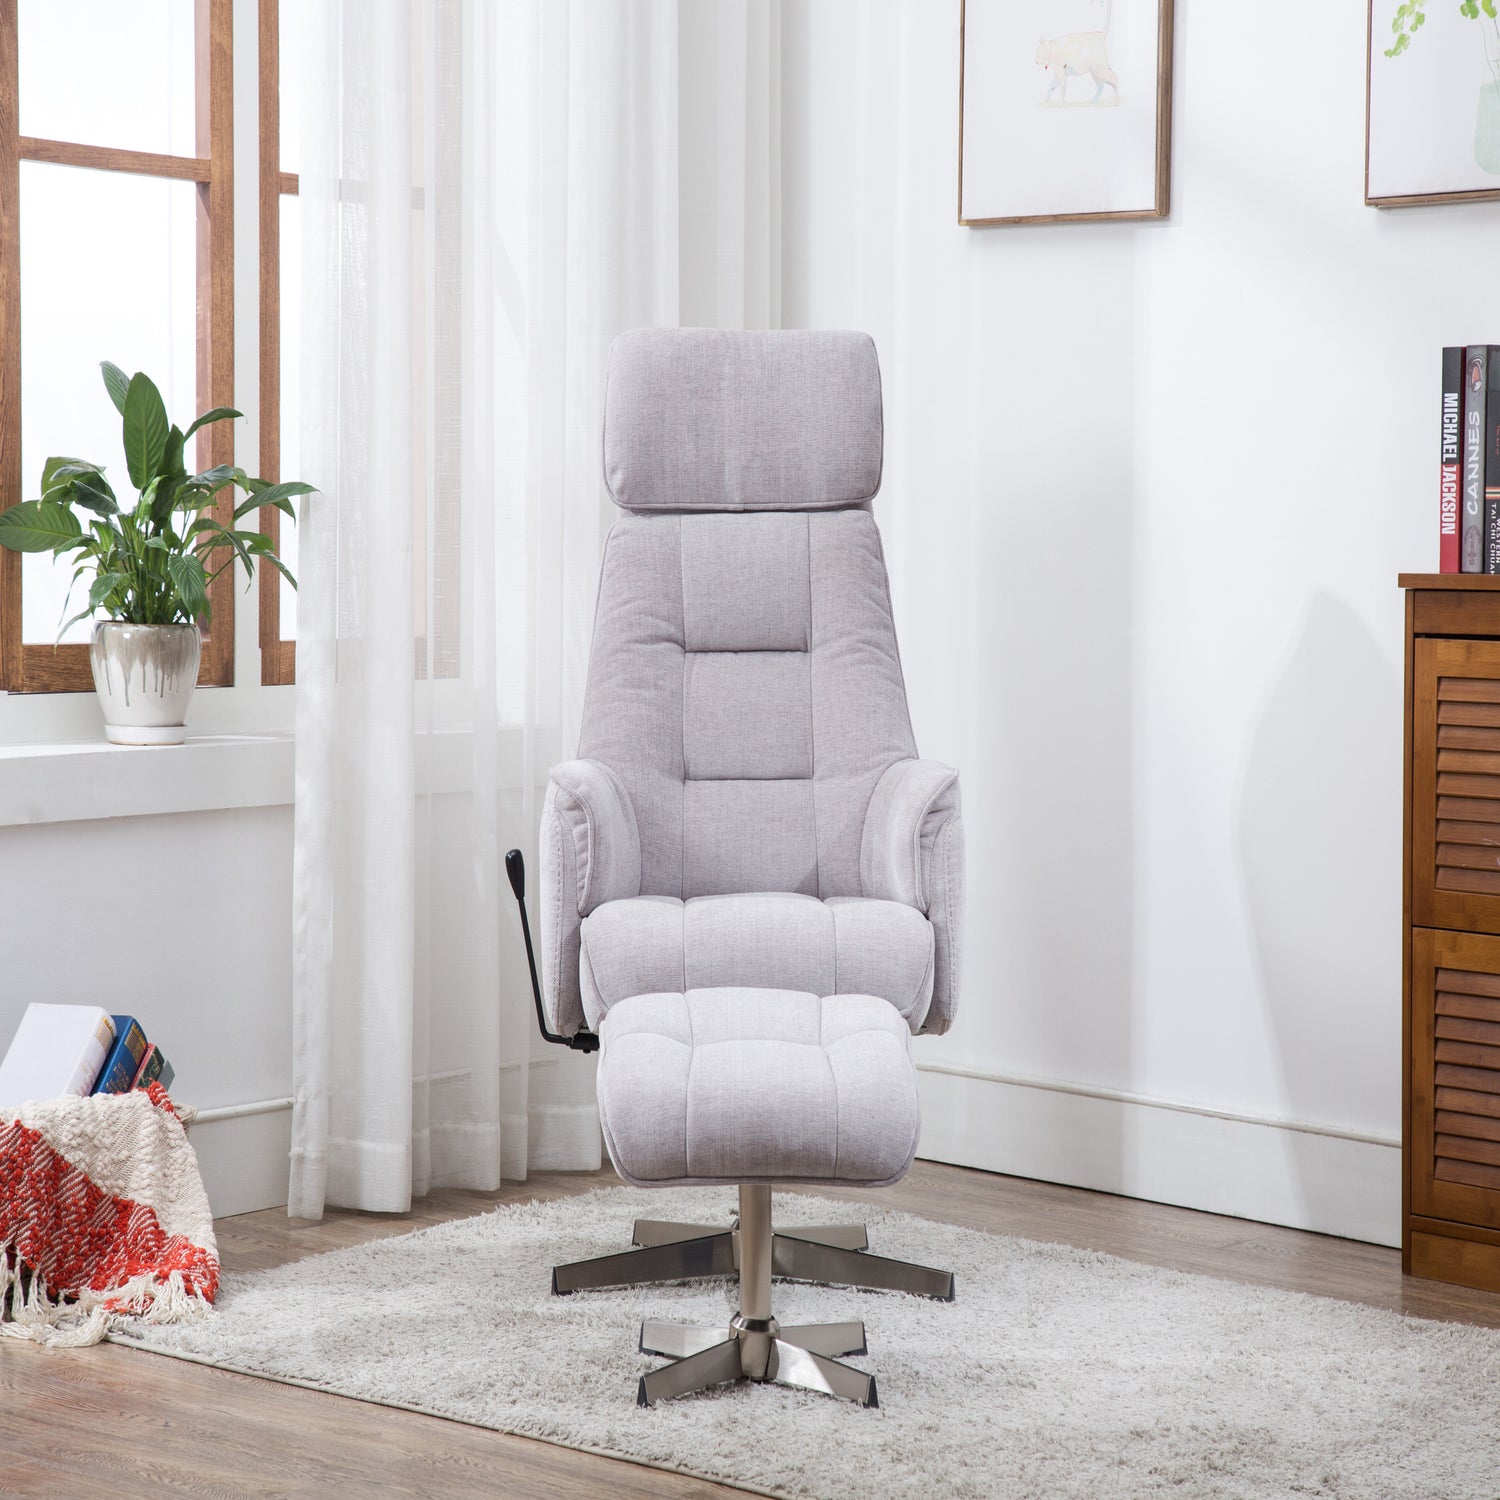 GFA Auckland Recliner And Foot Stool